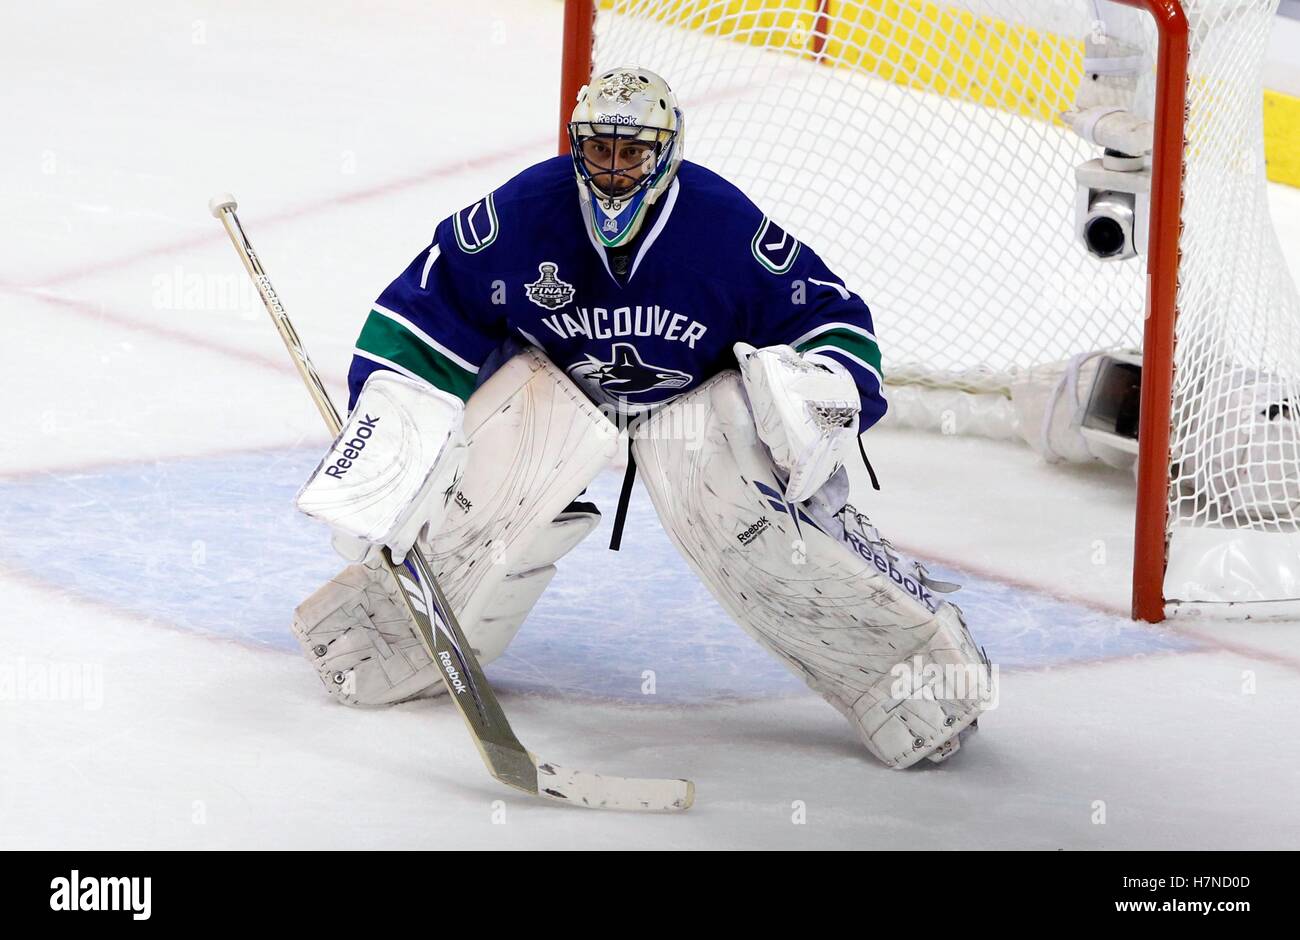 Luongo in the millionaires jersey  Canucks, Hockey goalie, Vancouver  canucks